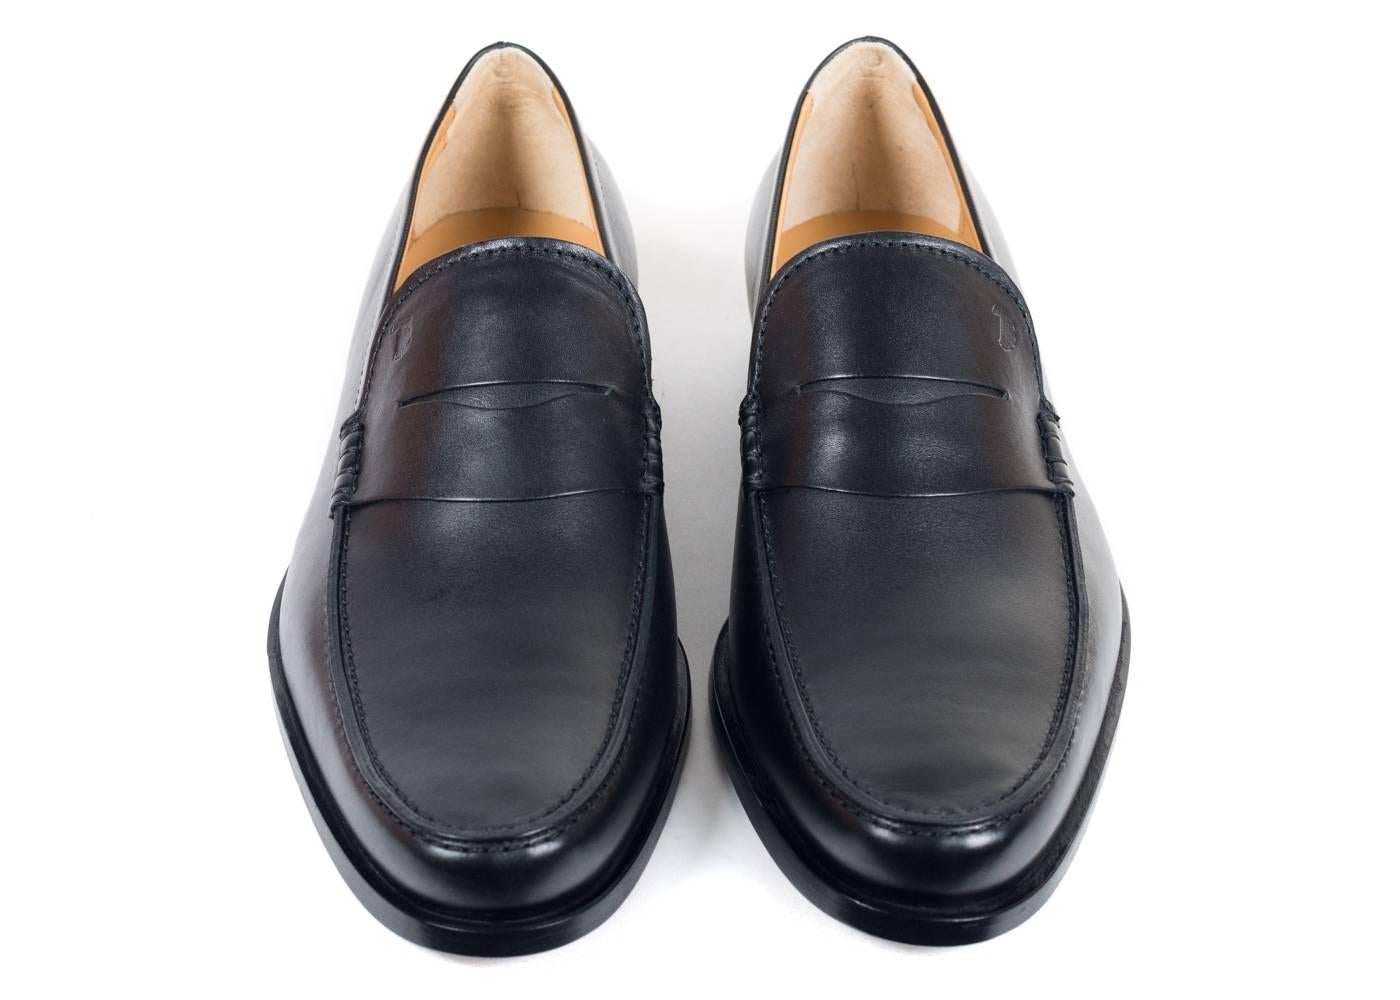 Brand New Tod's Men's Loafers
Original Box & Dust Bag Included
Retails in Stores & Online for $495
Size UK10/ US11
All Shoes are in UK Sizing

Tod's classic penny loafers crafted in black calfskin leather for an ultra smooth look to these shoes.